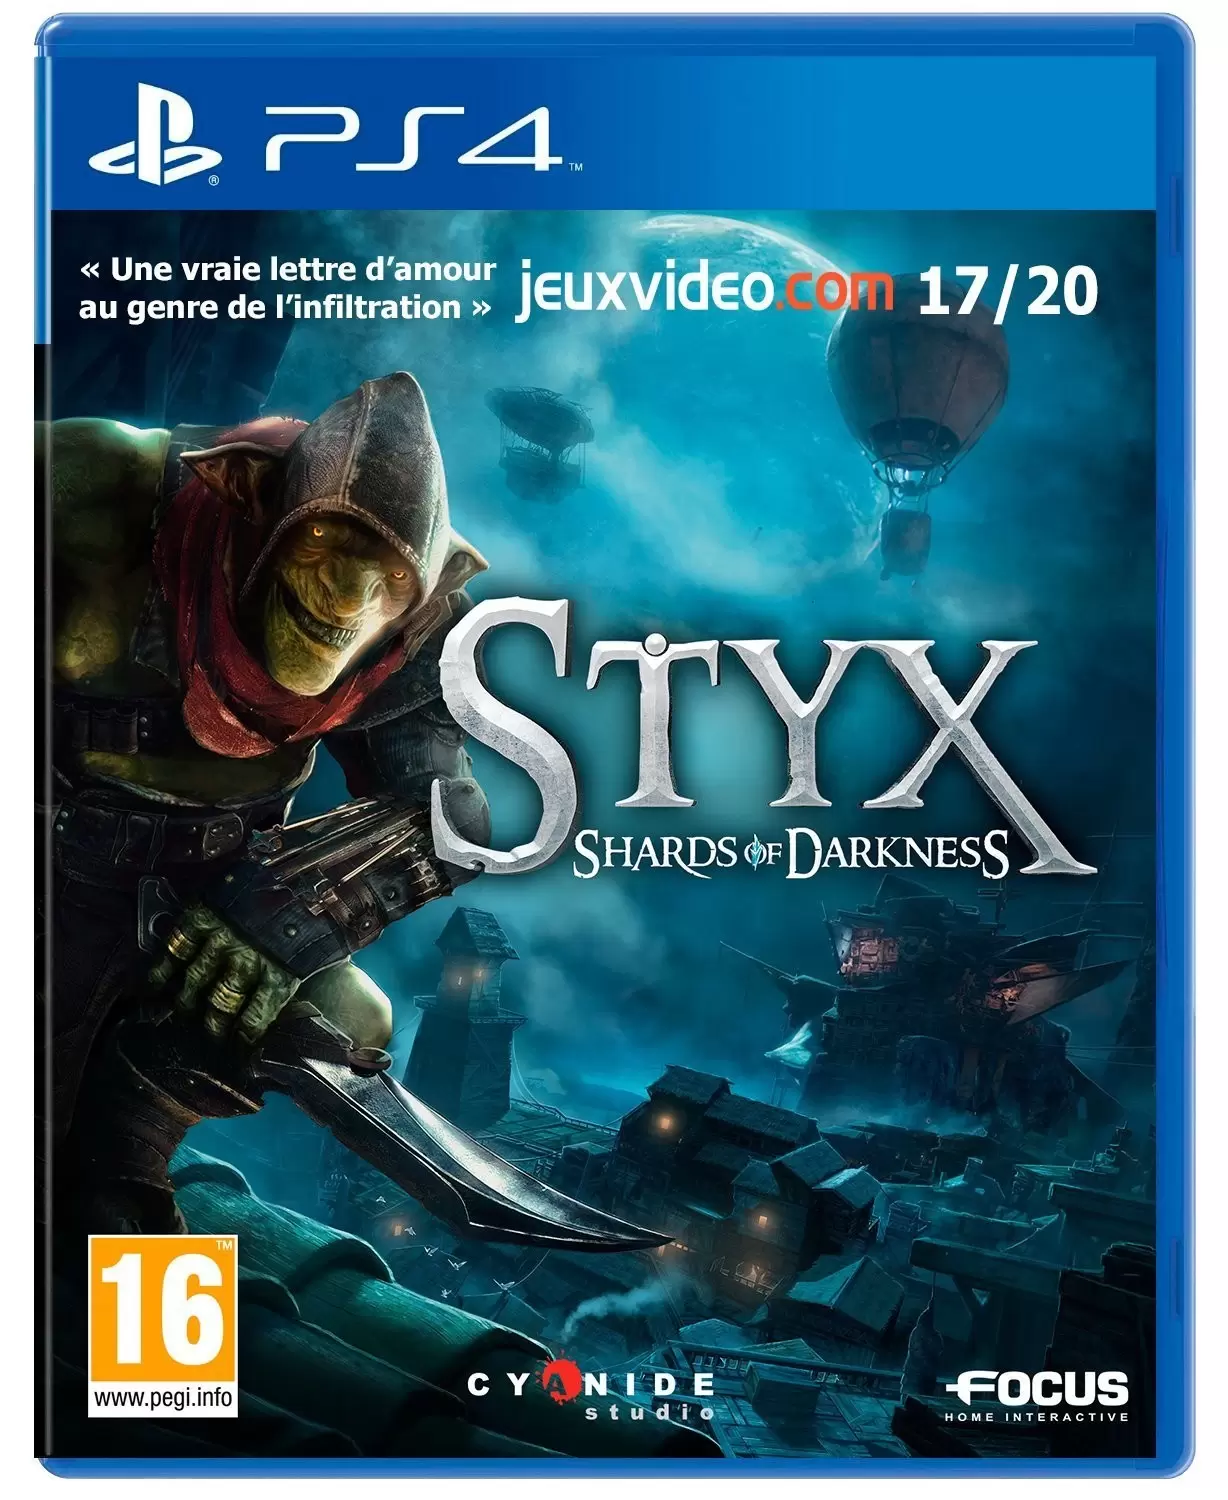 PS4 Games - Styx : Shards of Darkness